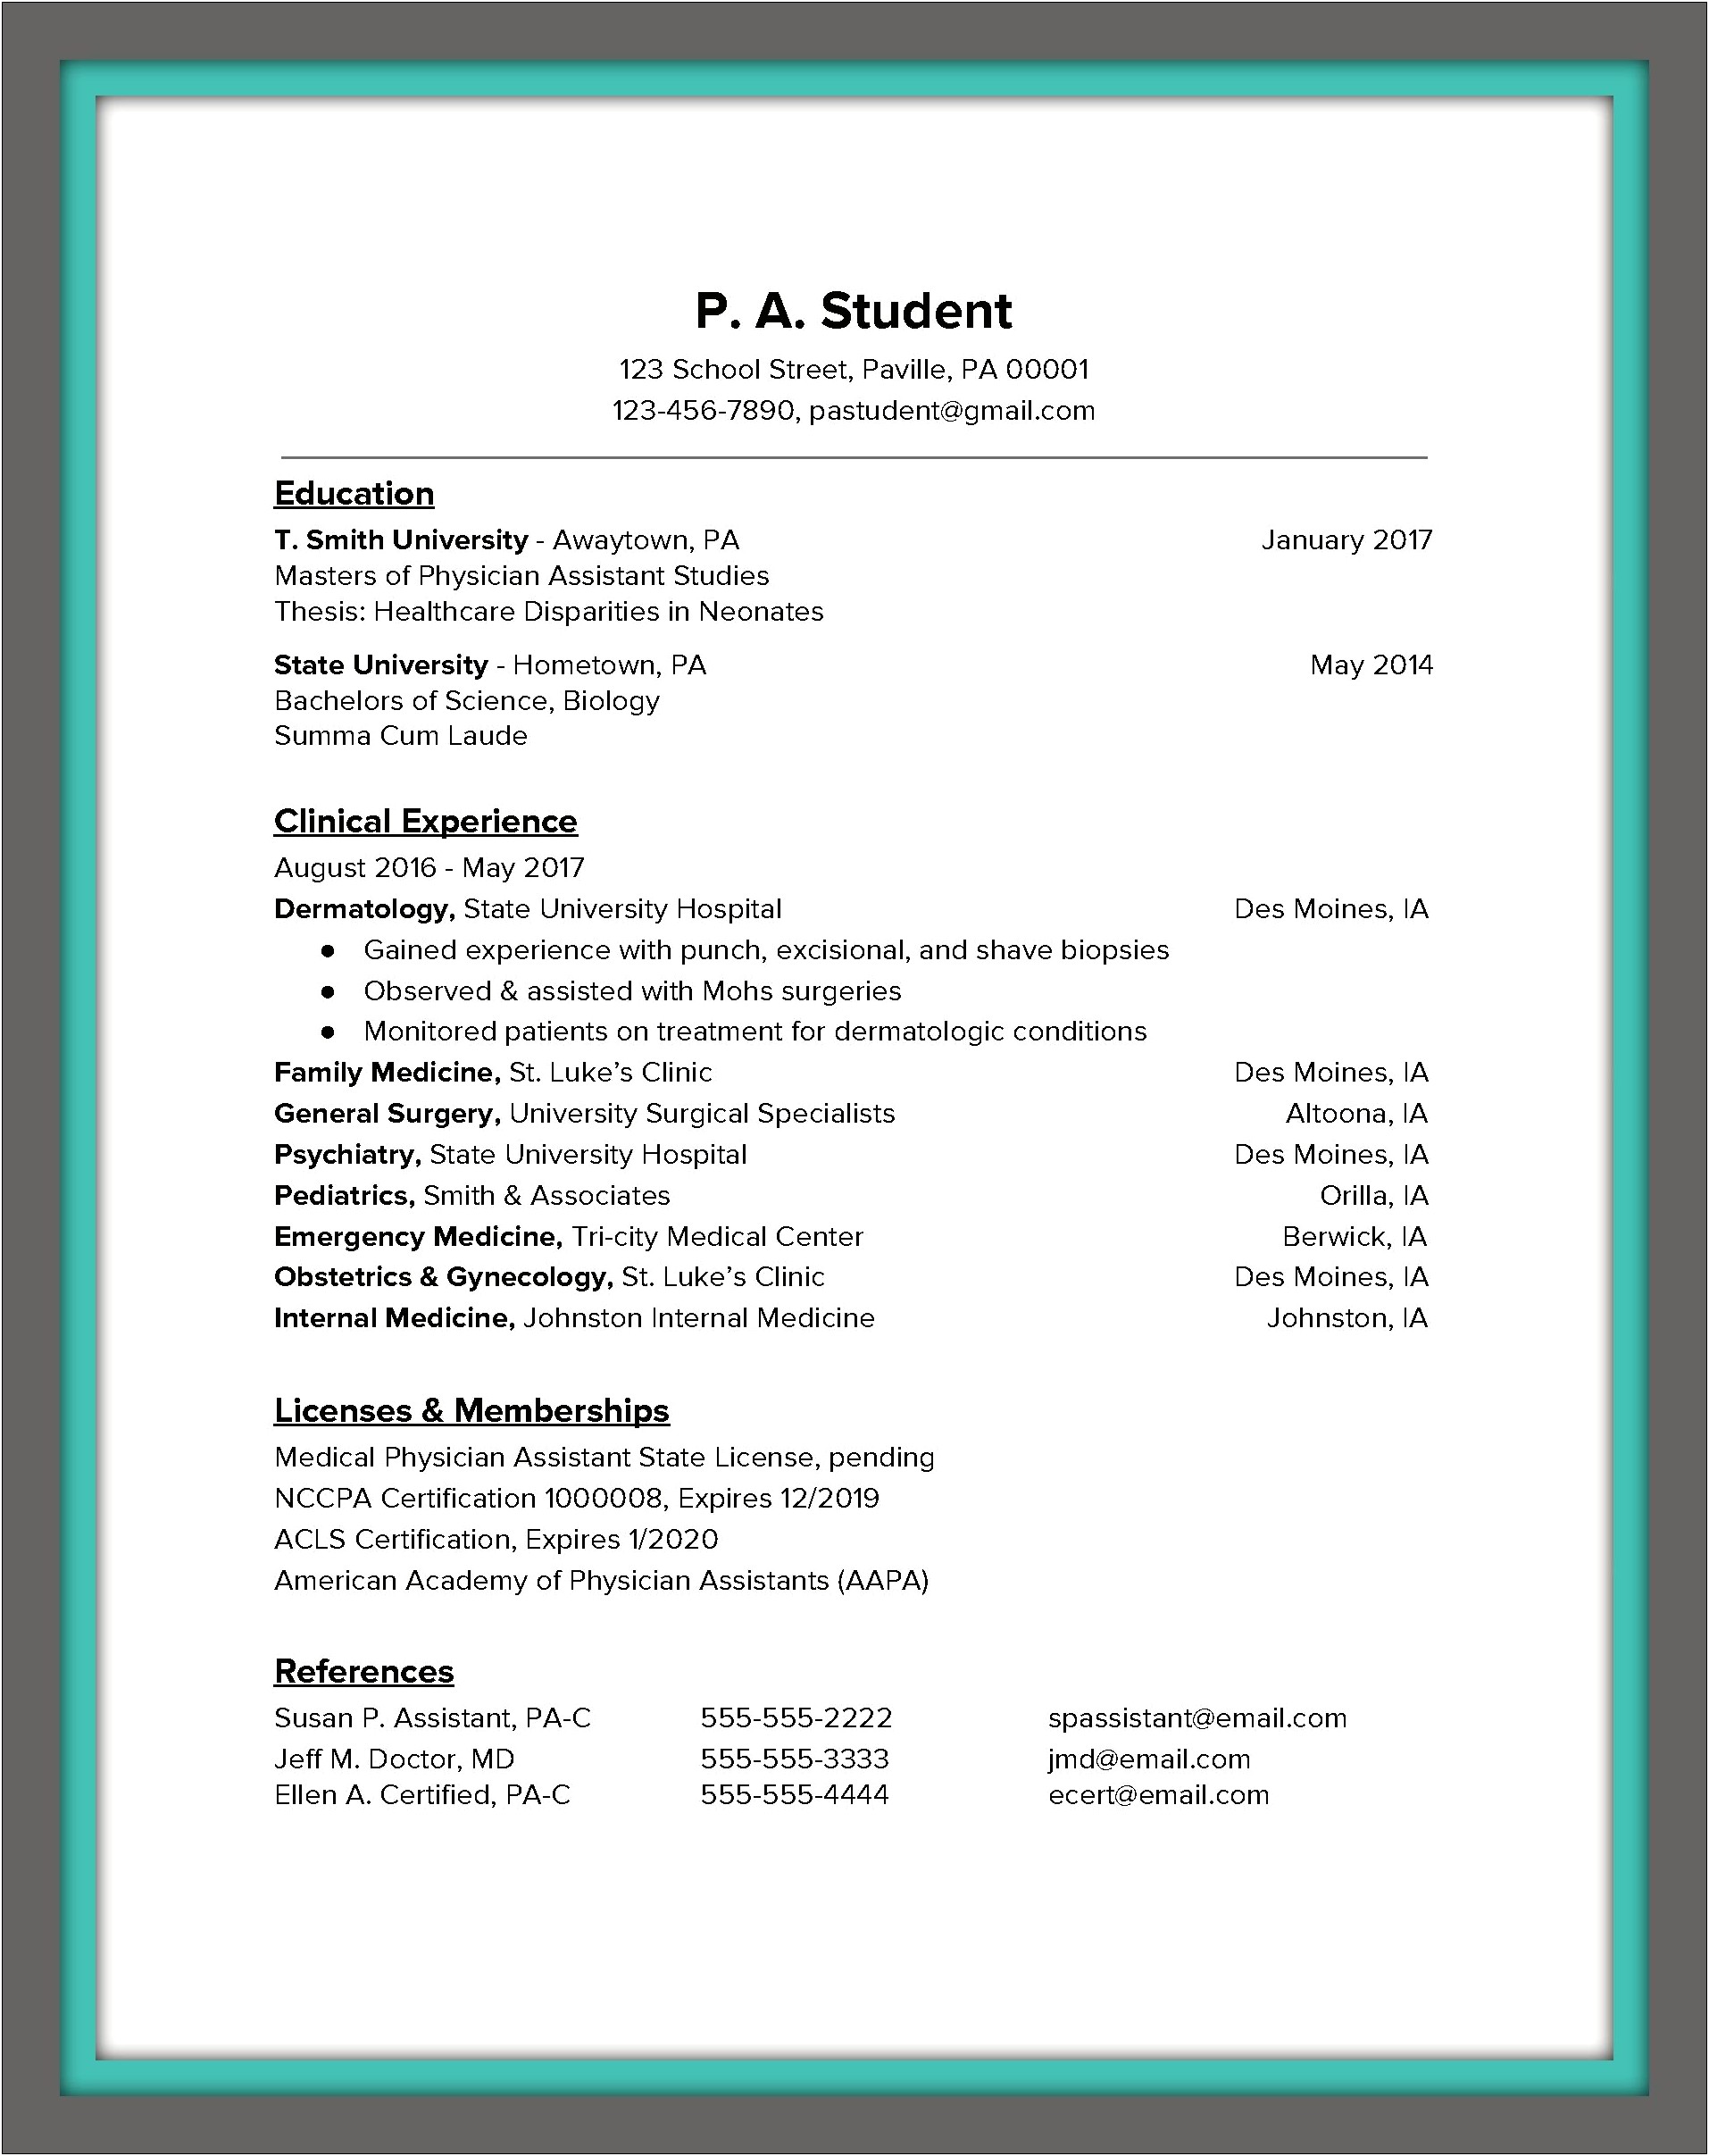 New Grad Physician Assistant Resume Objective